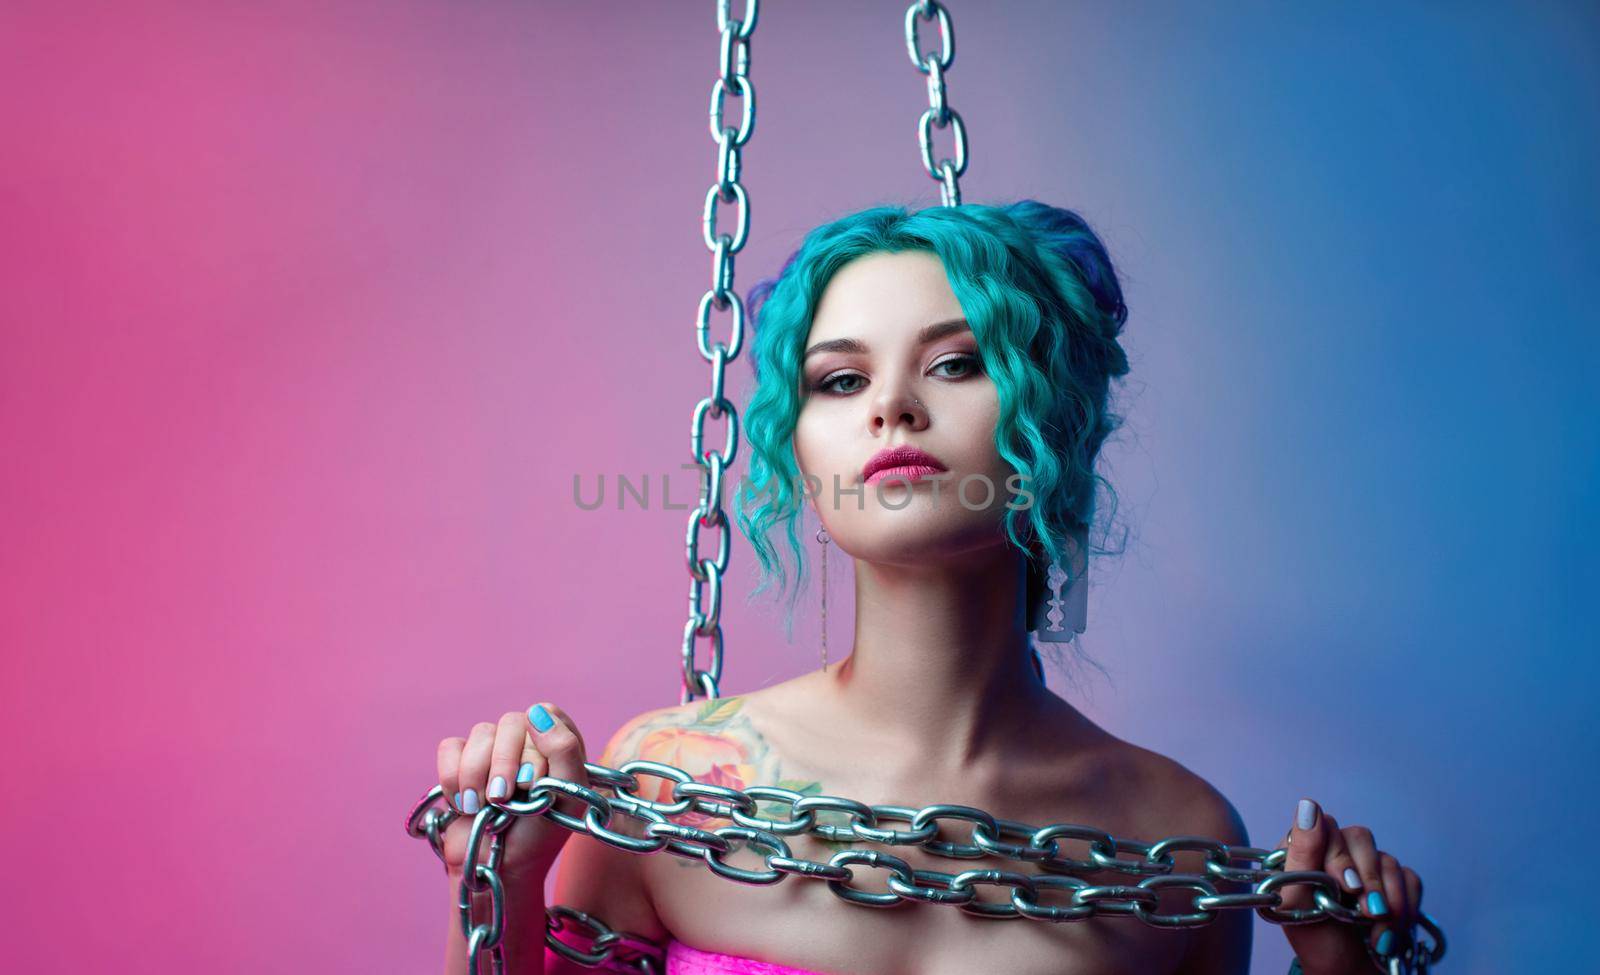 the woman with blue hair is holding a large chain